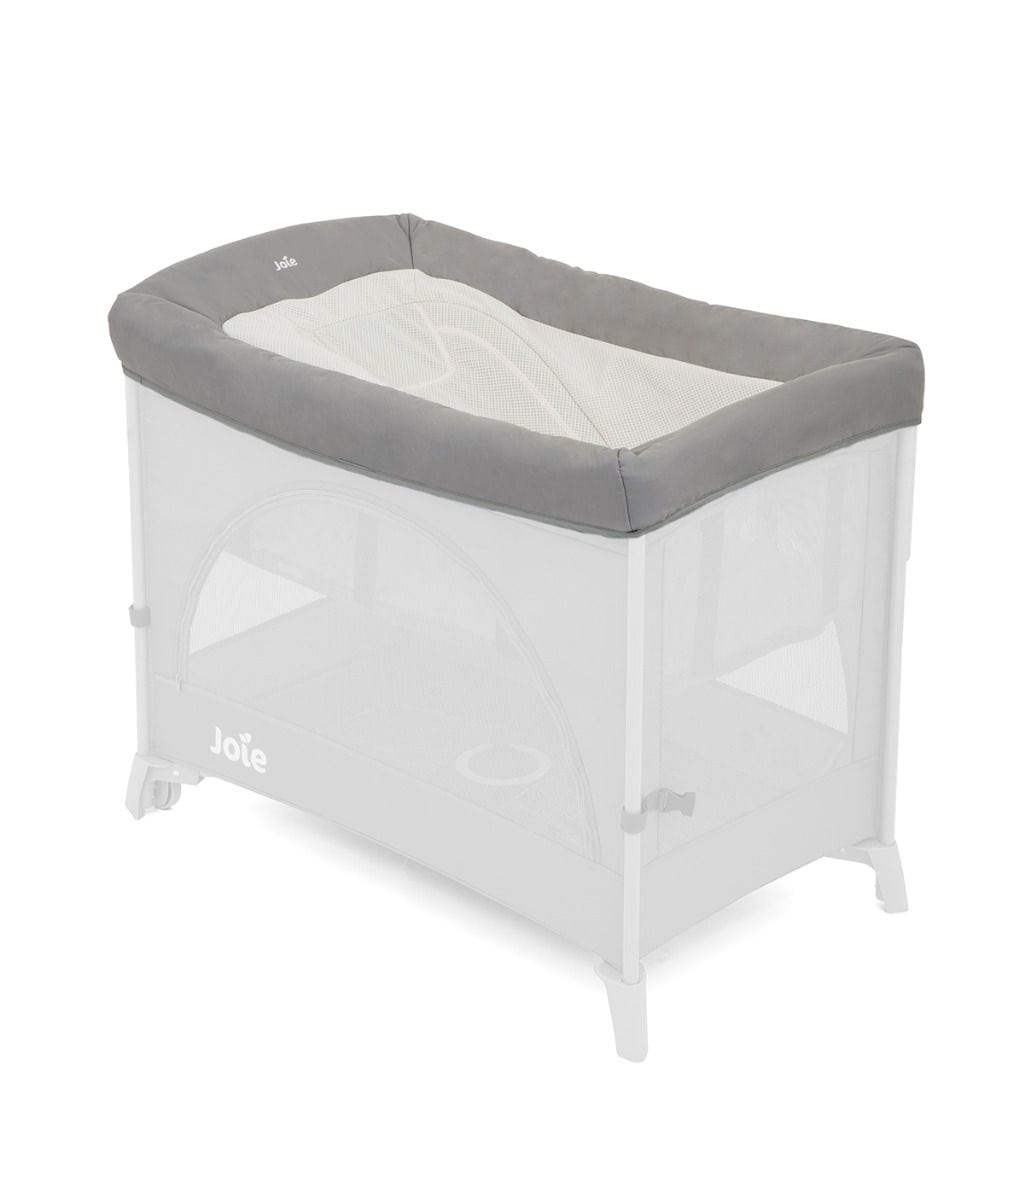 Joie Kubbie Daydreamer Napper Topper in Foggy Grey Cot Mattresses A1812SAFGY000 5056080606811